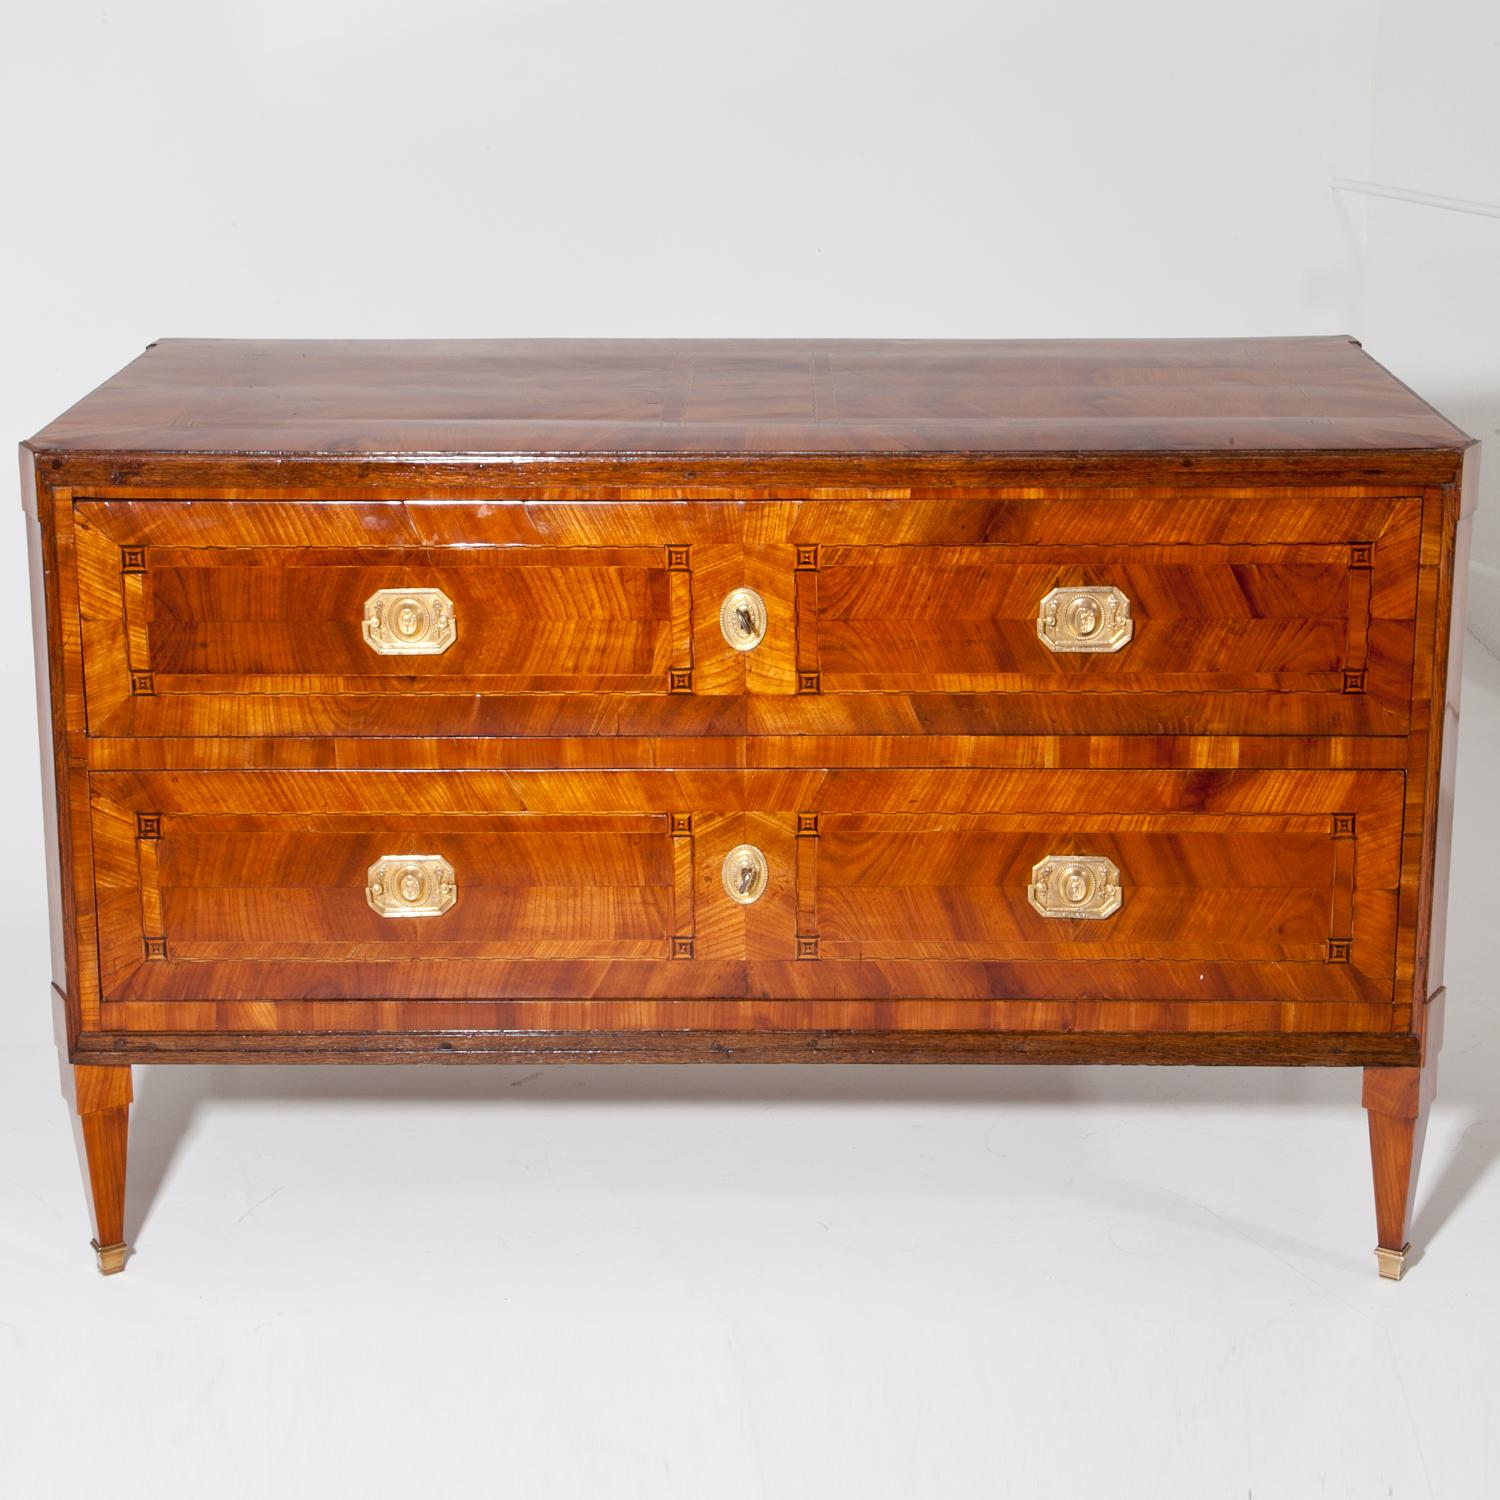 Neoclassical chest of drawers standing on angled tapered legs with brass sabots. The chest has two drawers and shows a beautiful cherrywood veneer pattern with inlays accentuating the front, top and sides. Very beautiful, hand-polished condition.